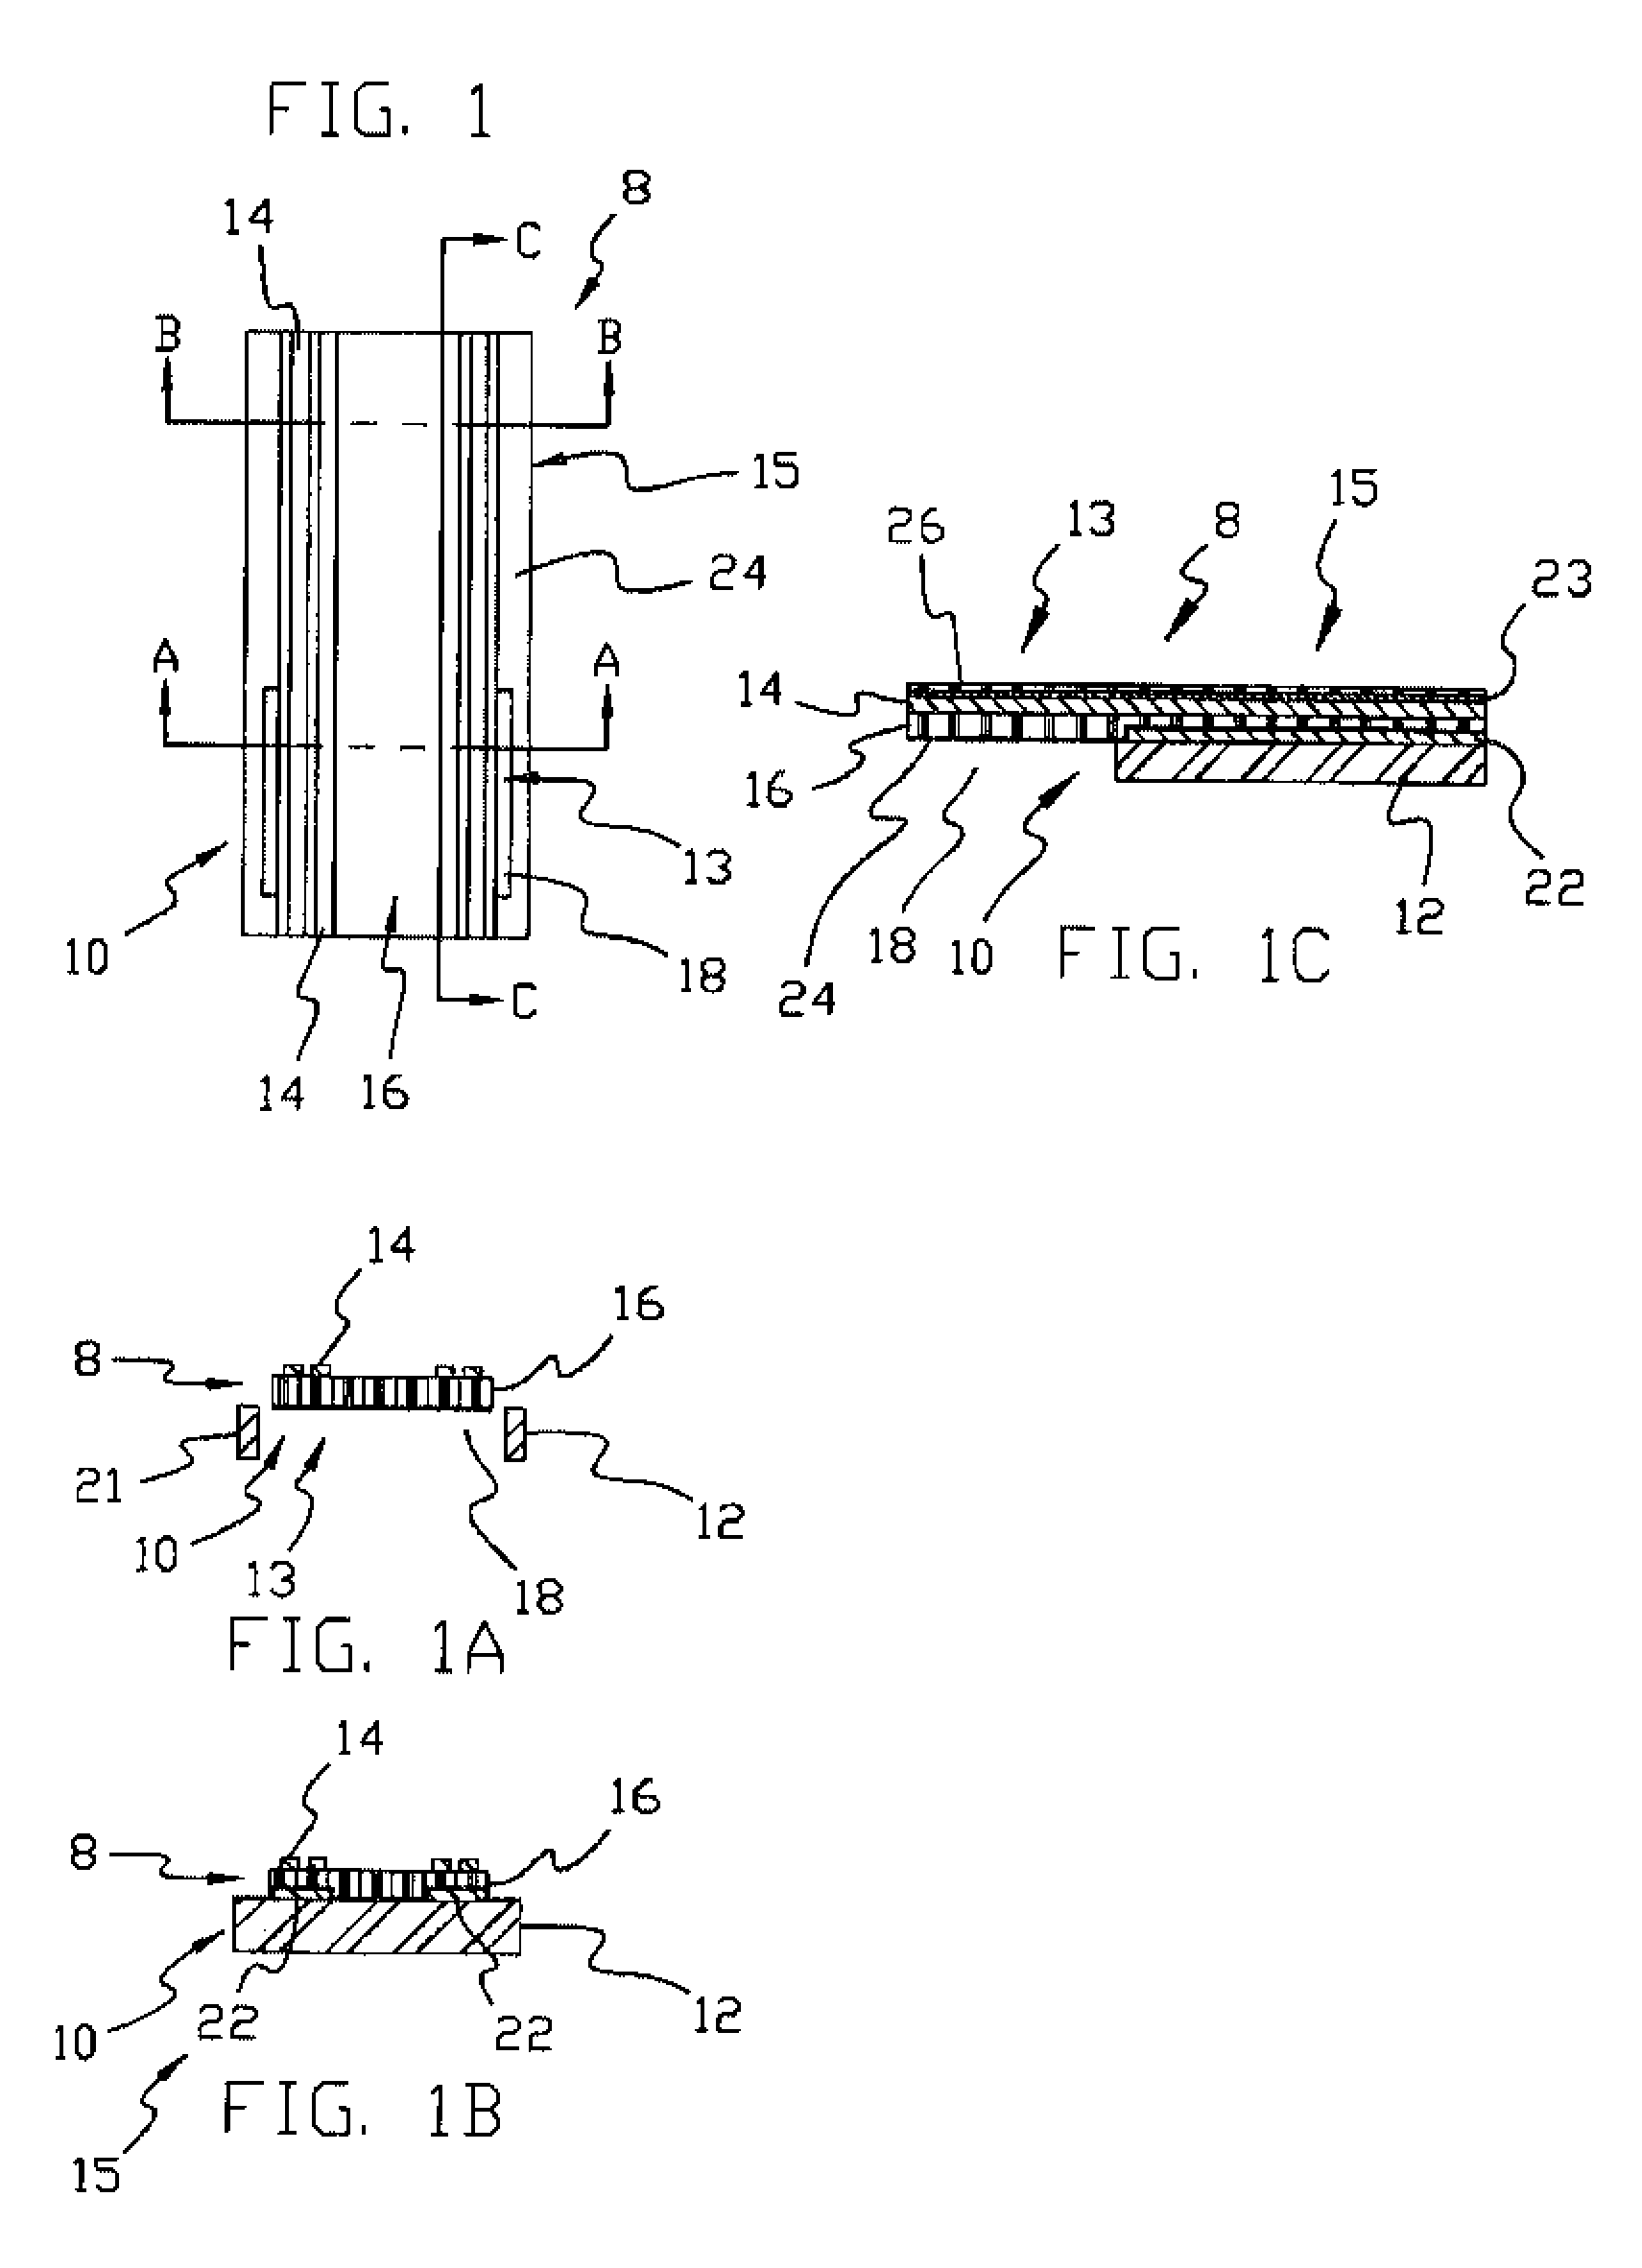 Multi-layer ground plane structures for integrated lead suspensions